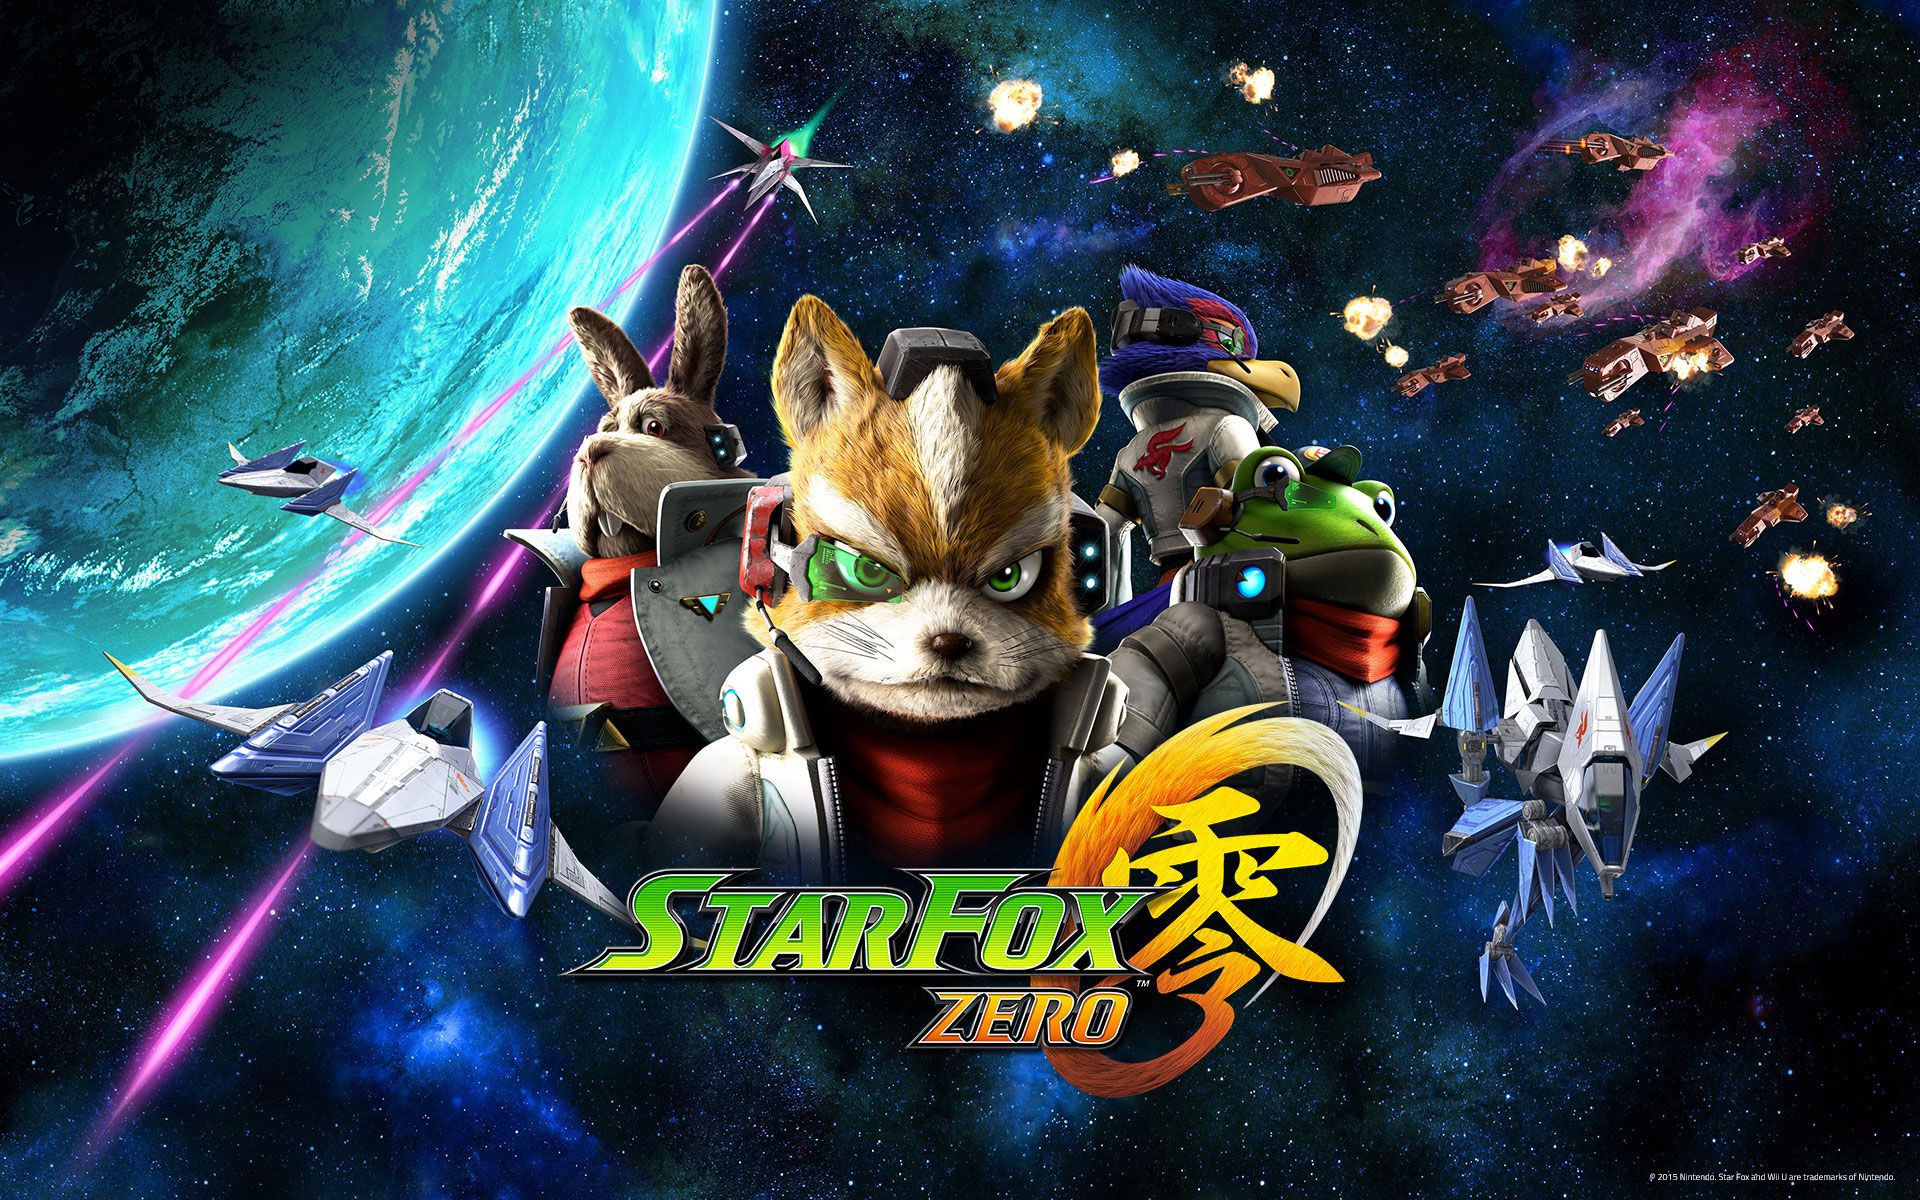 You can now watch Star Fox Zero's epic animated movie